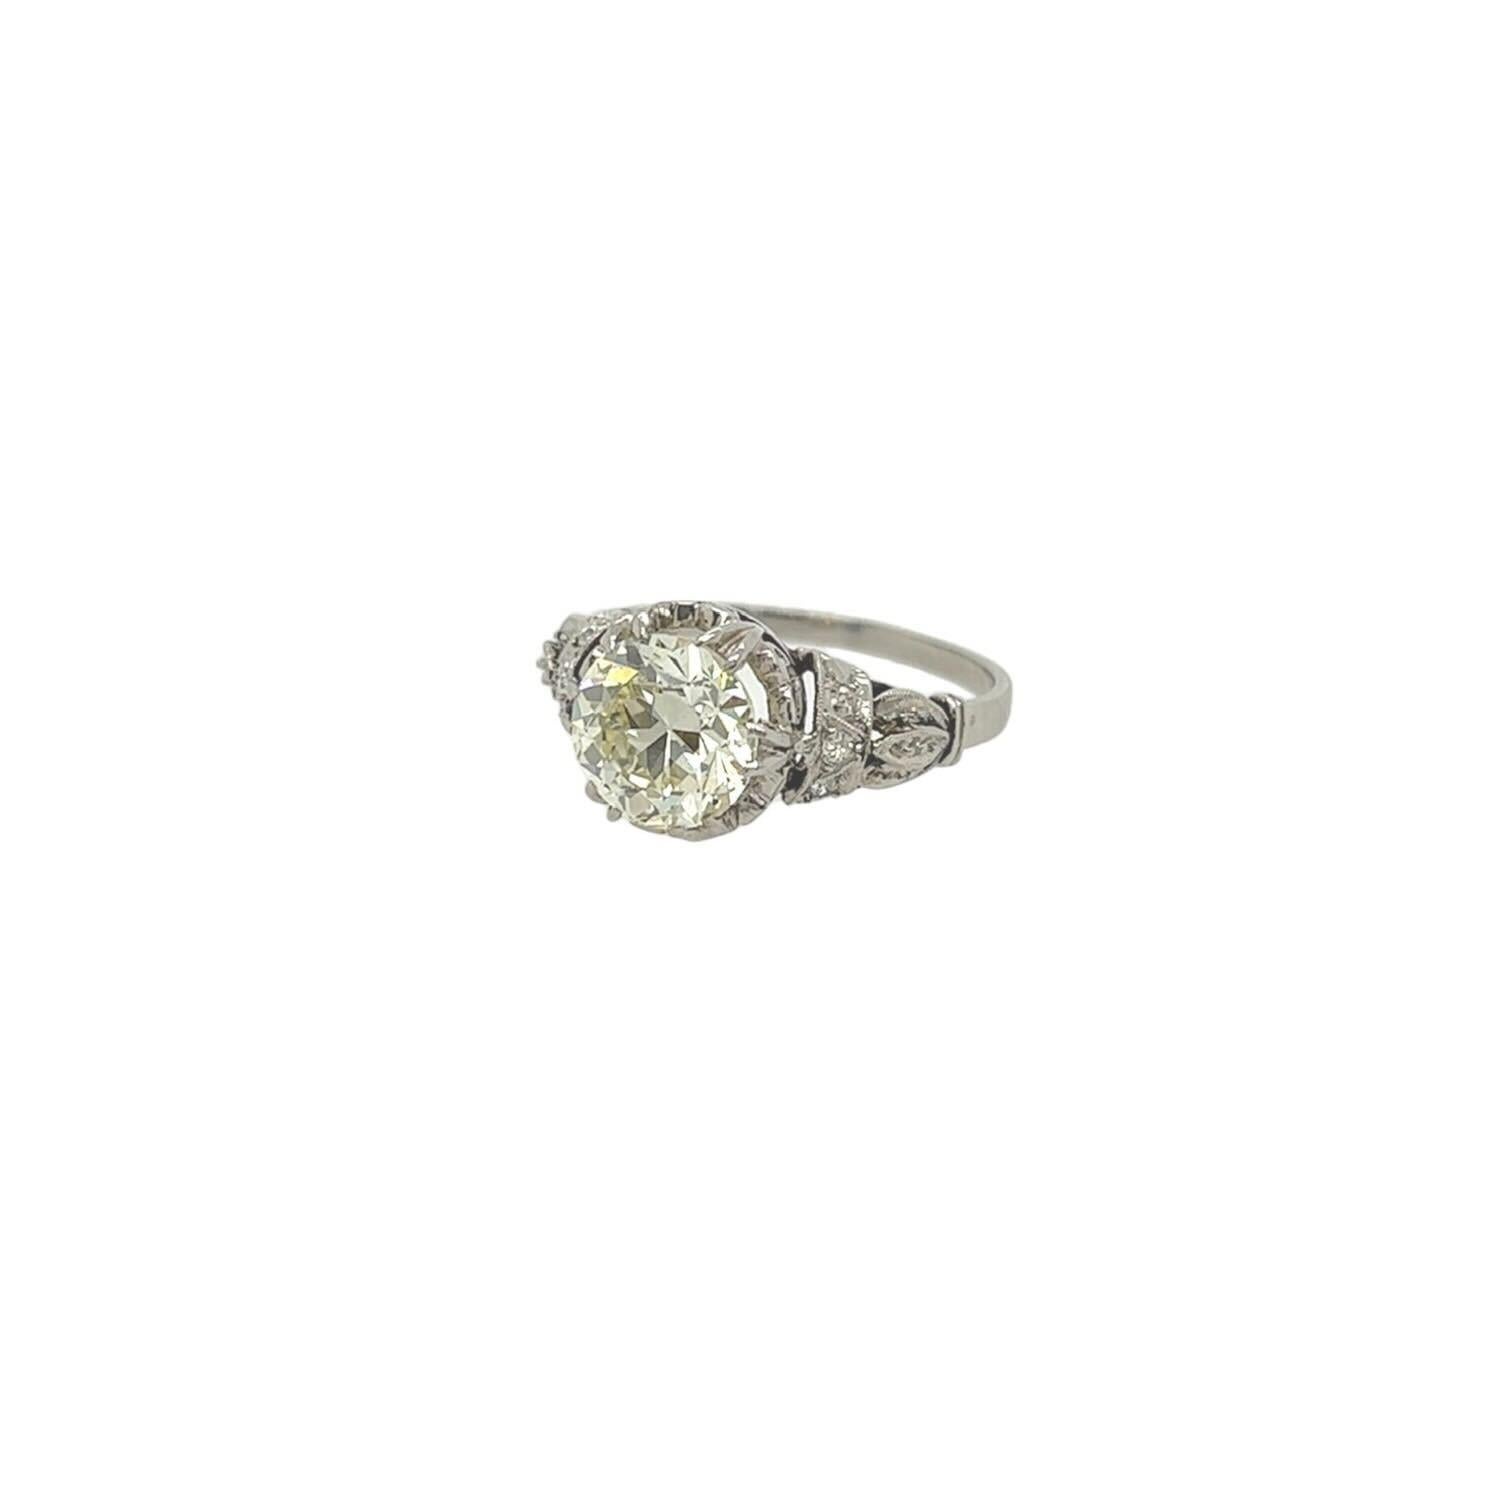 A platinum and diamond ring.  Centering an old European cut diamond of 1.75 carats* in a filigree setting with three (3) accent diamonds on each side.  Size approximately 6.  Gross weight approximately 3.70 grams.           
 *Stone removed and